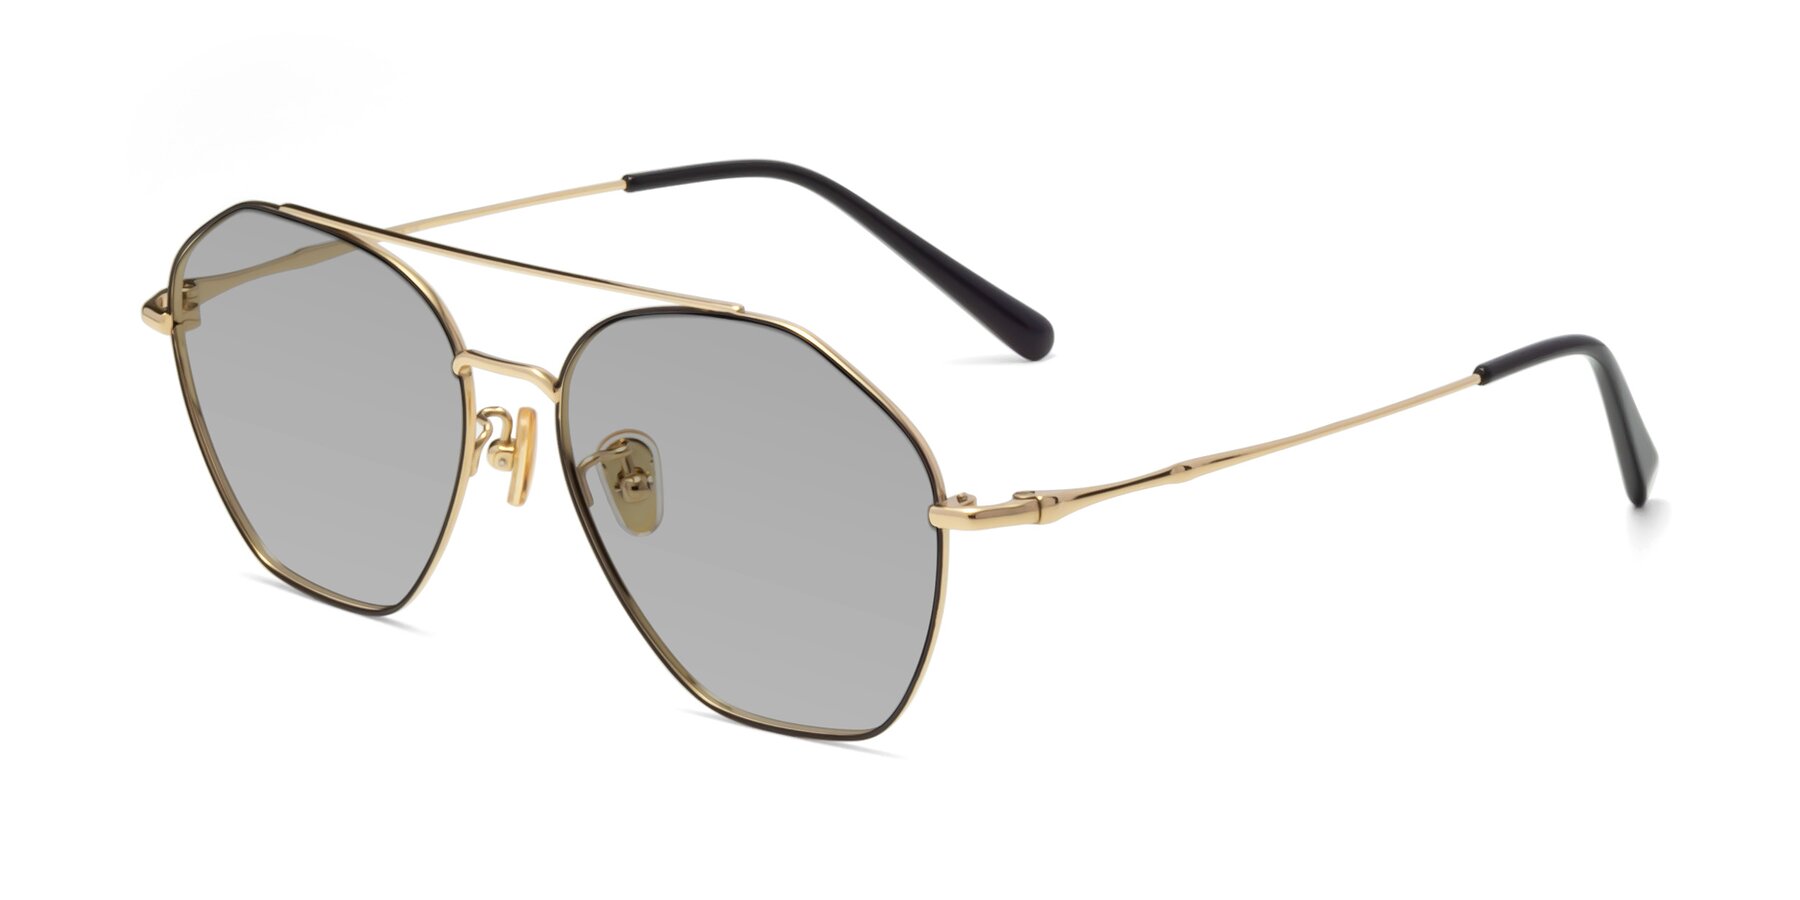 Angle of Linton in Black-Gold with Light Gray Tinted Lenses